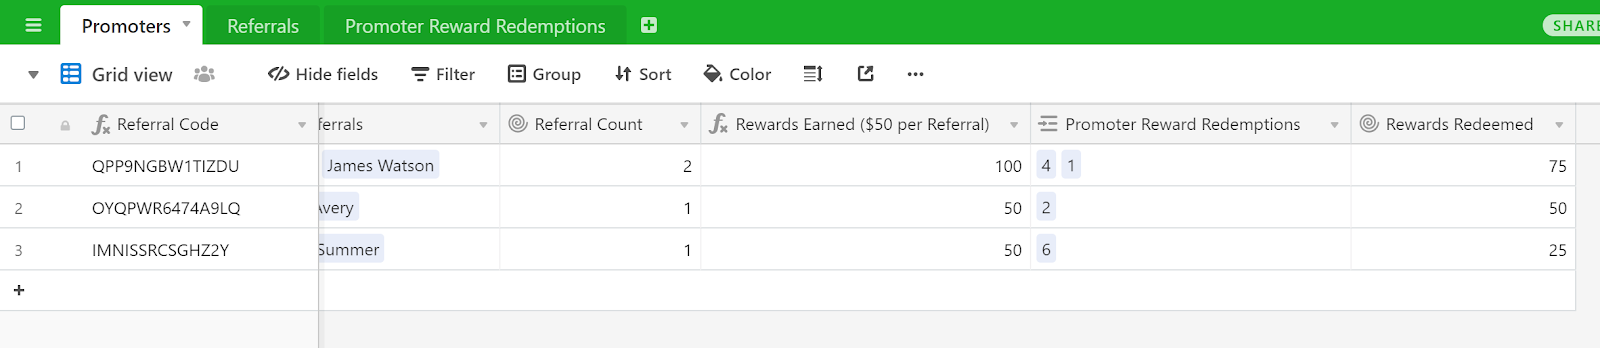 Referral Tracking spreadsheet Promoters tracking rewards and referrals screenshot example